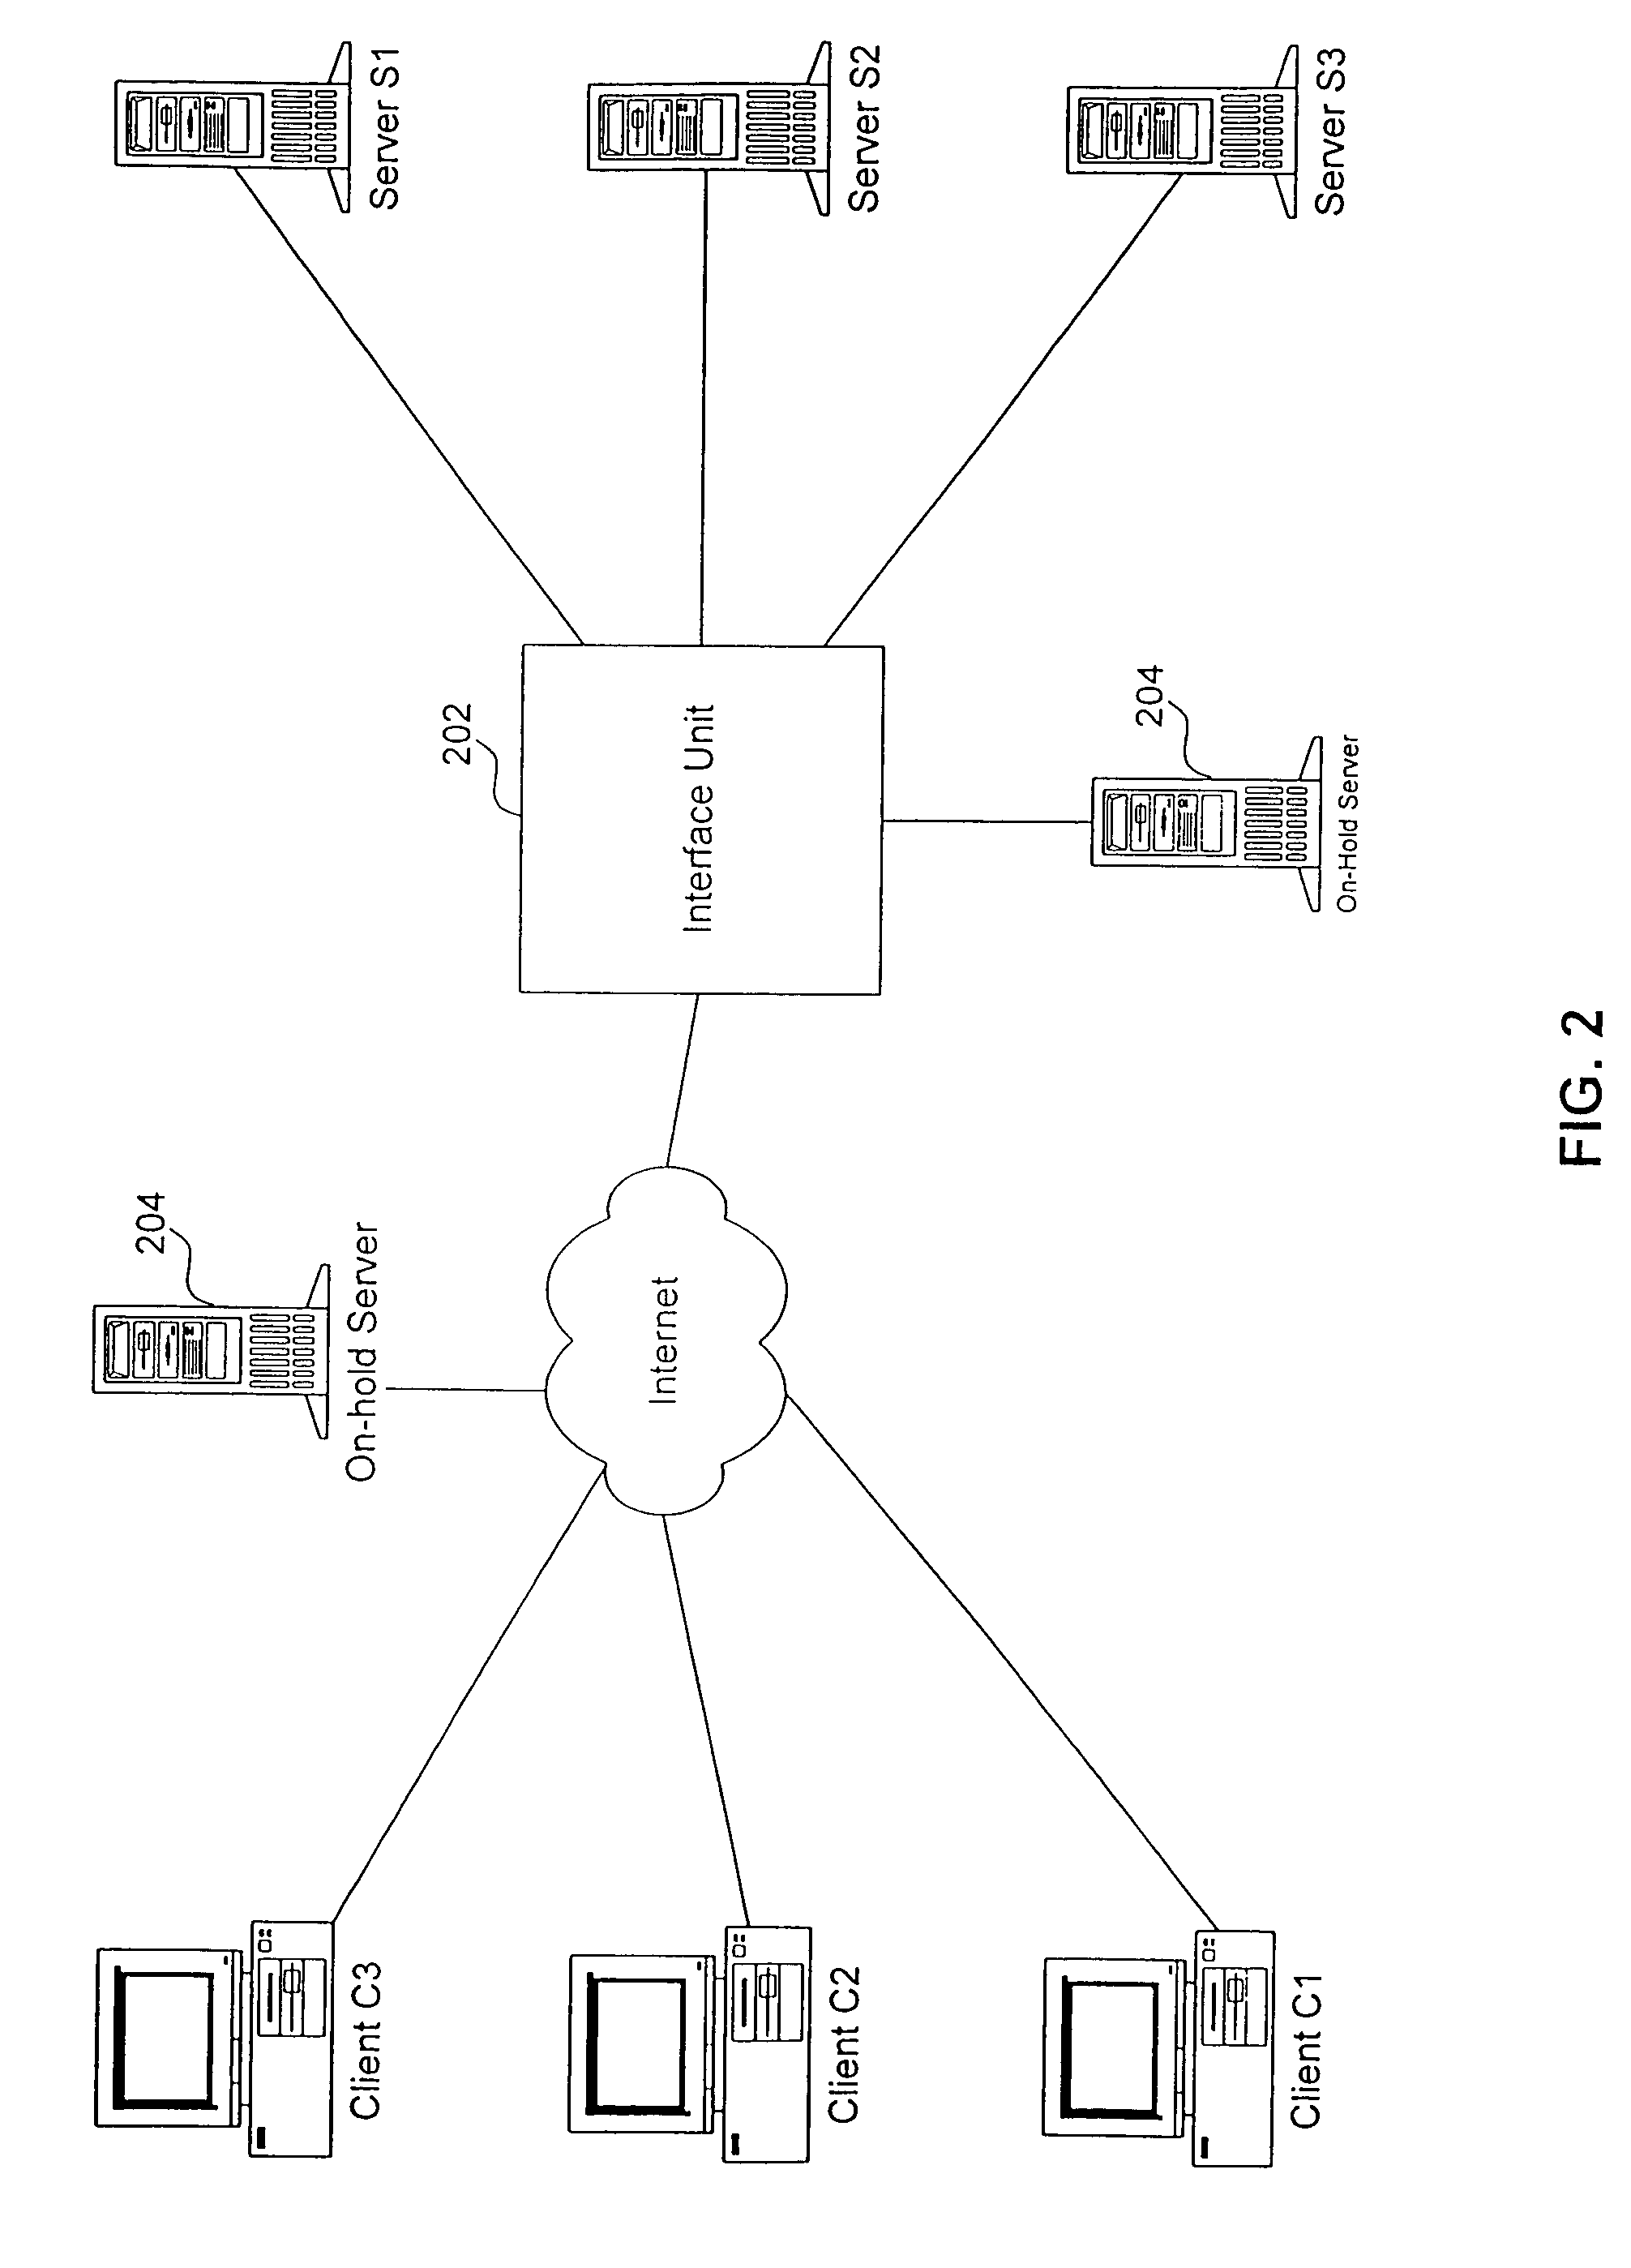 Apparatus, method and computer program product for guaranteed content delivery incorporating putting a client on-hold based on response time